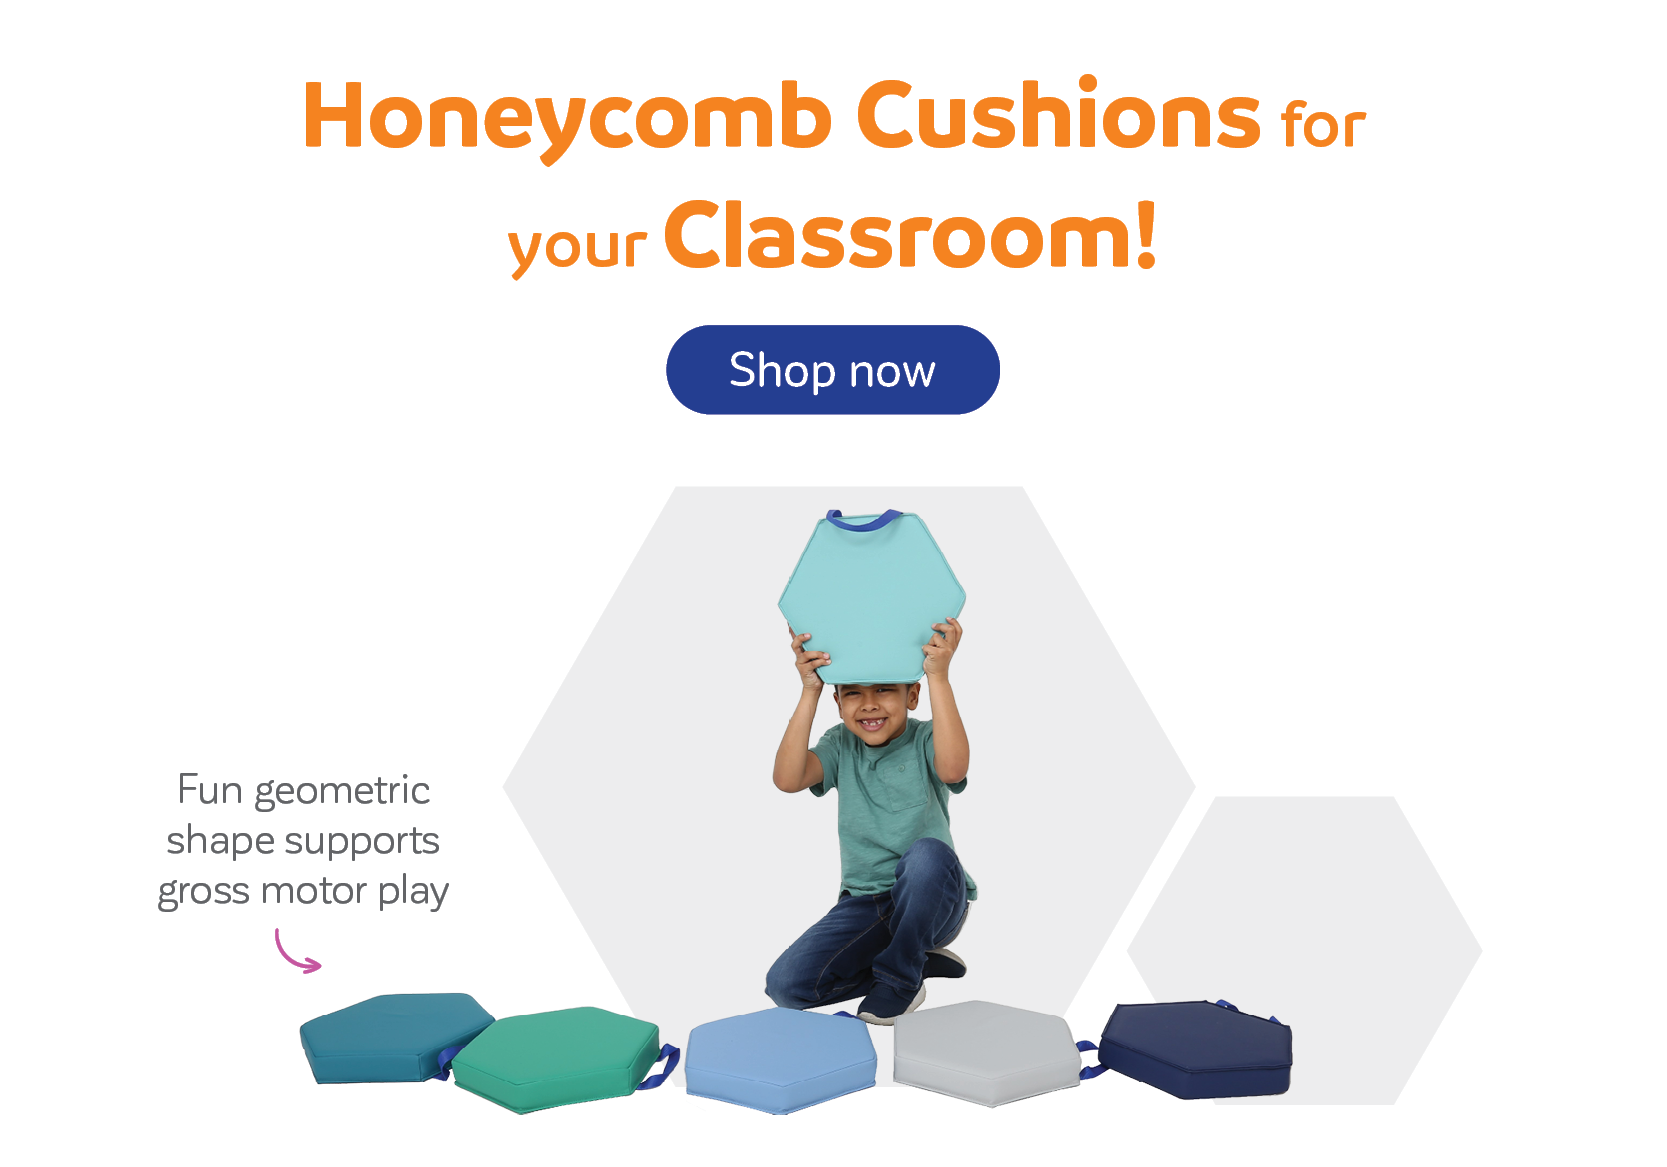 Honeycomb Cushions for your Classroom!